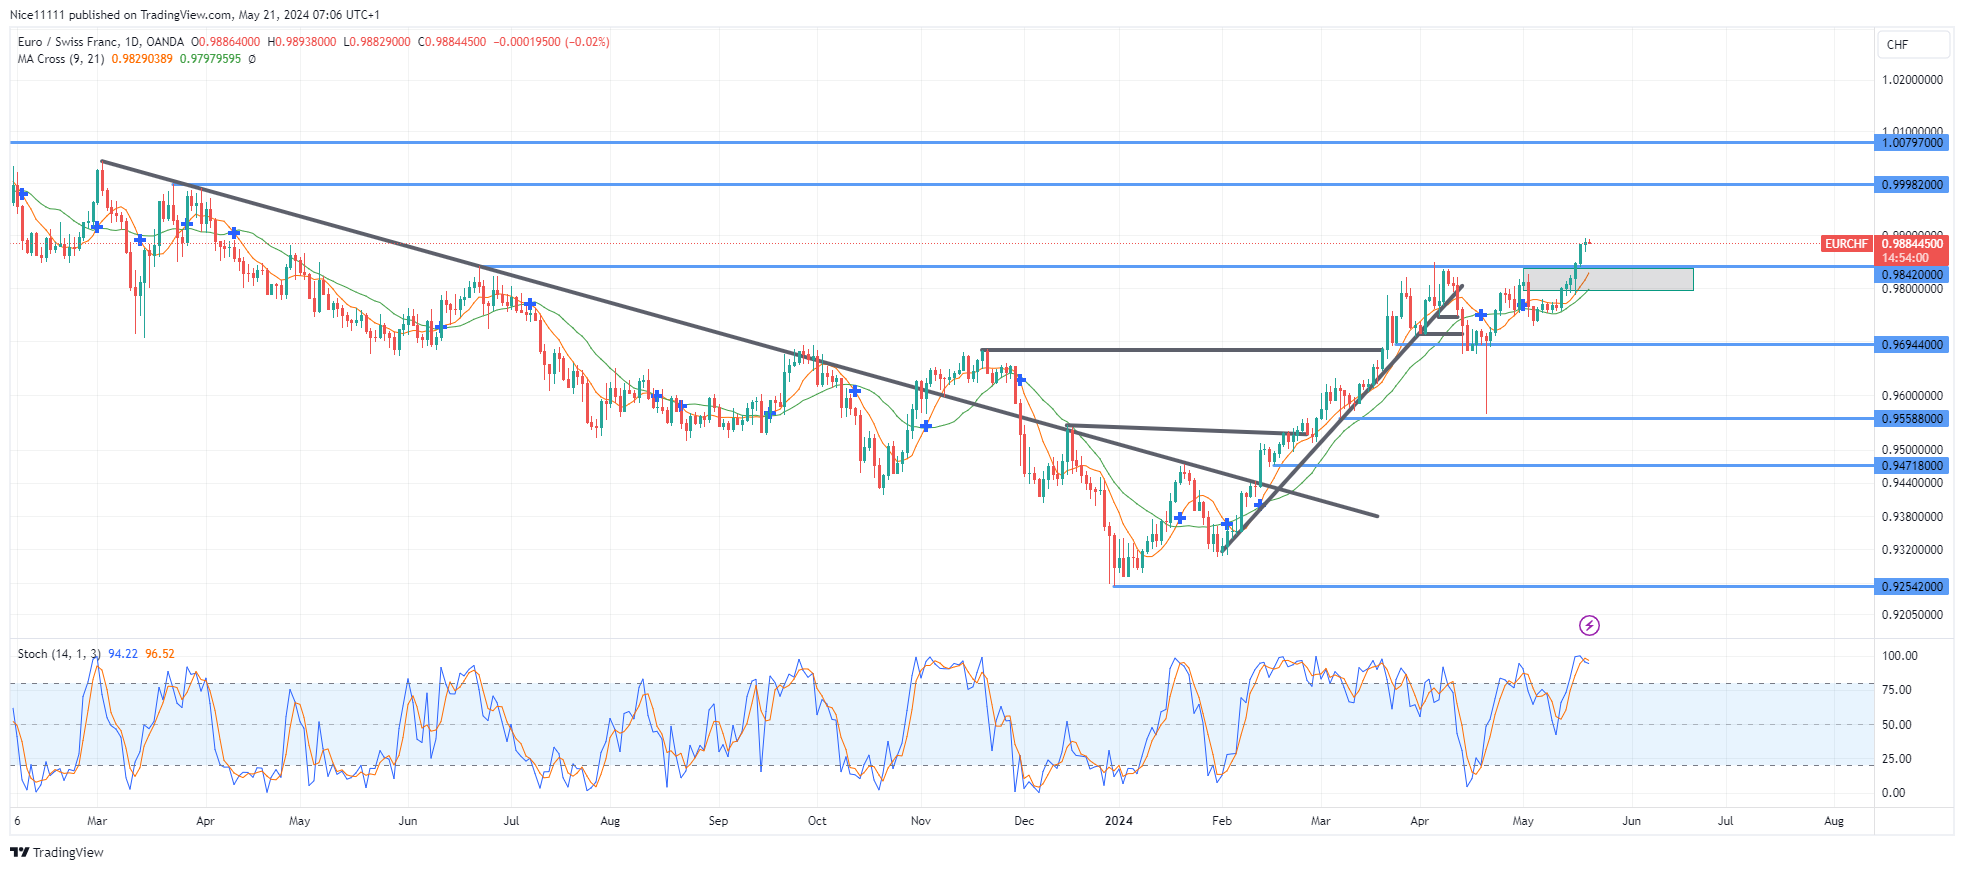 EURCHF Retracement is Imminent as Price Becomes Overbought